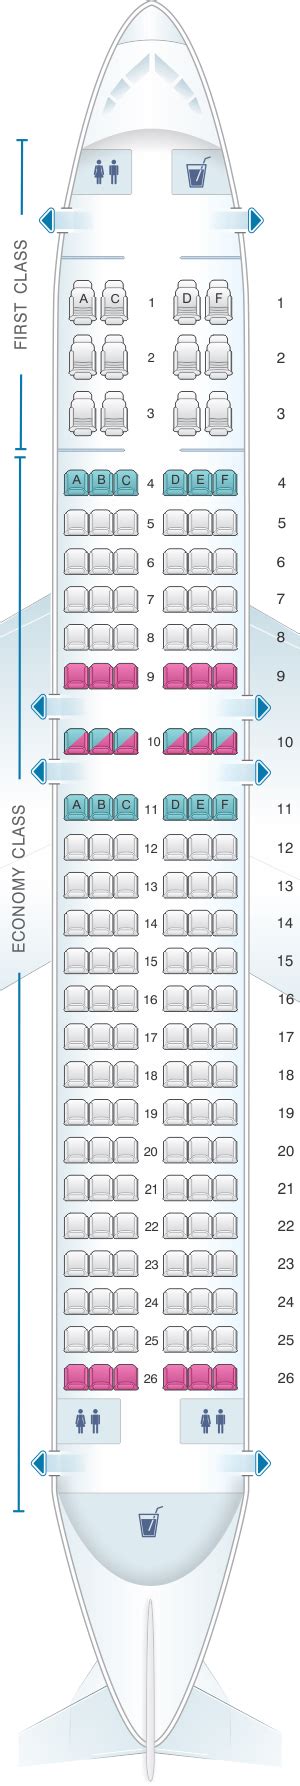 Airbus a320 seat map american airlines. Aircraft specifications. Cruise Speed: 530 mph. Propulsion: Two IAE V2500-A5 turbofan engines, rated up to 27,000 pounds of thrust each. Wingspan: 111 feet, 11 inches. View Airbus 320 seating and specifications on United aircraft using this United Airlines seating chart. 